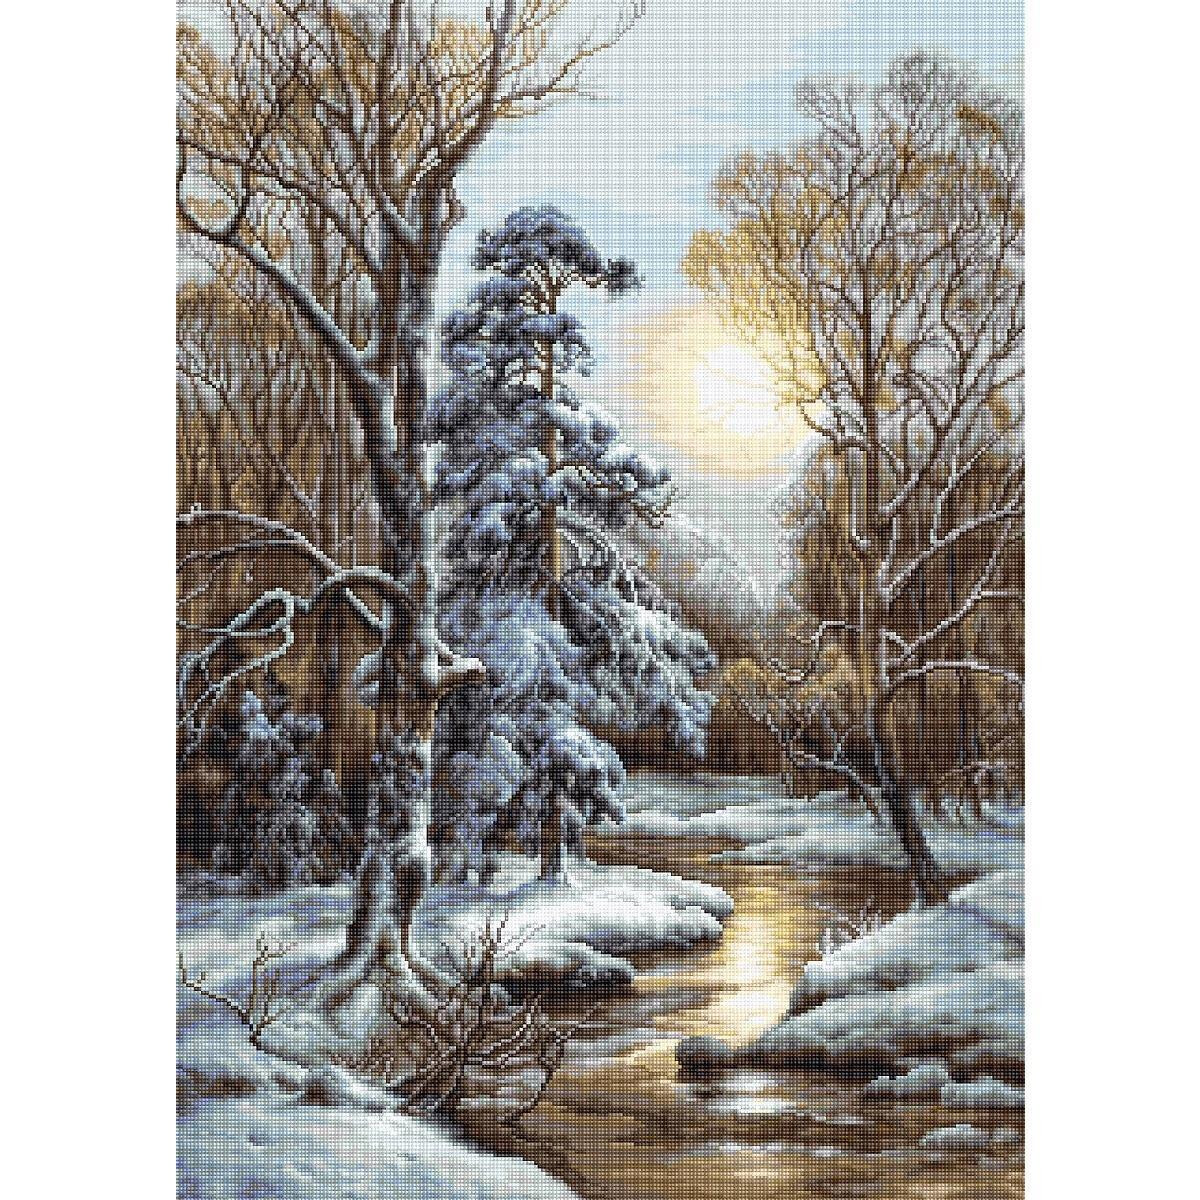 A tranquil winter landscape with a snow-covered forest....